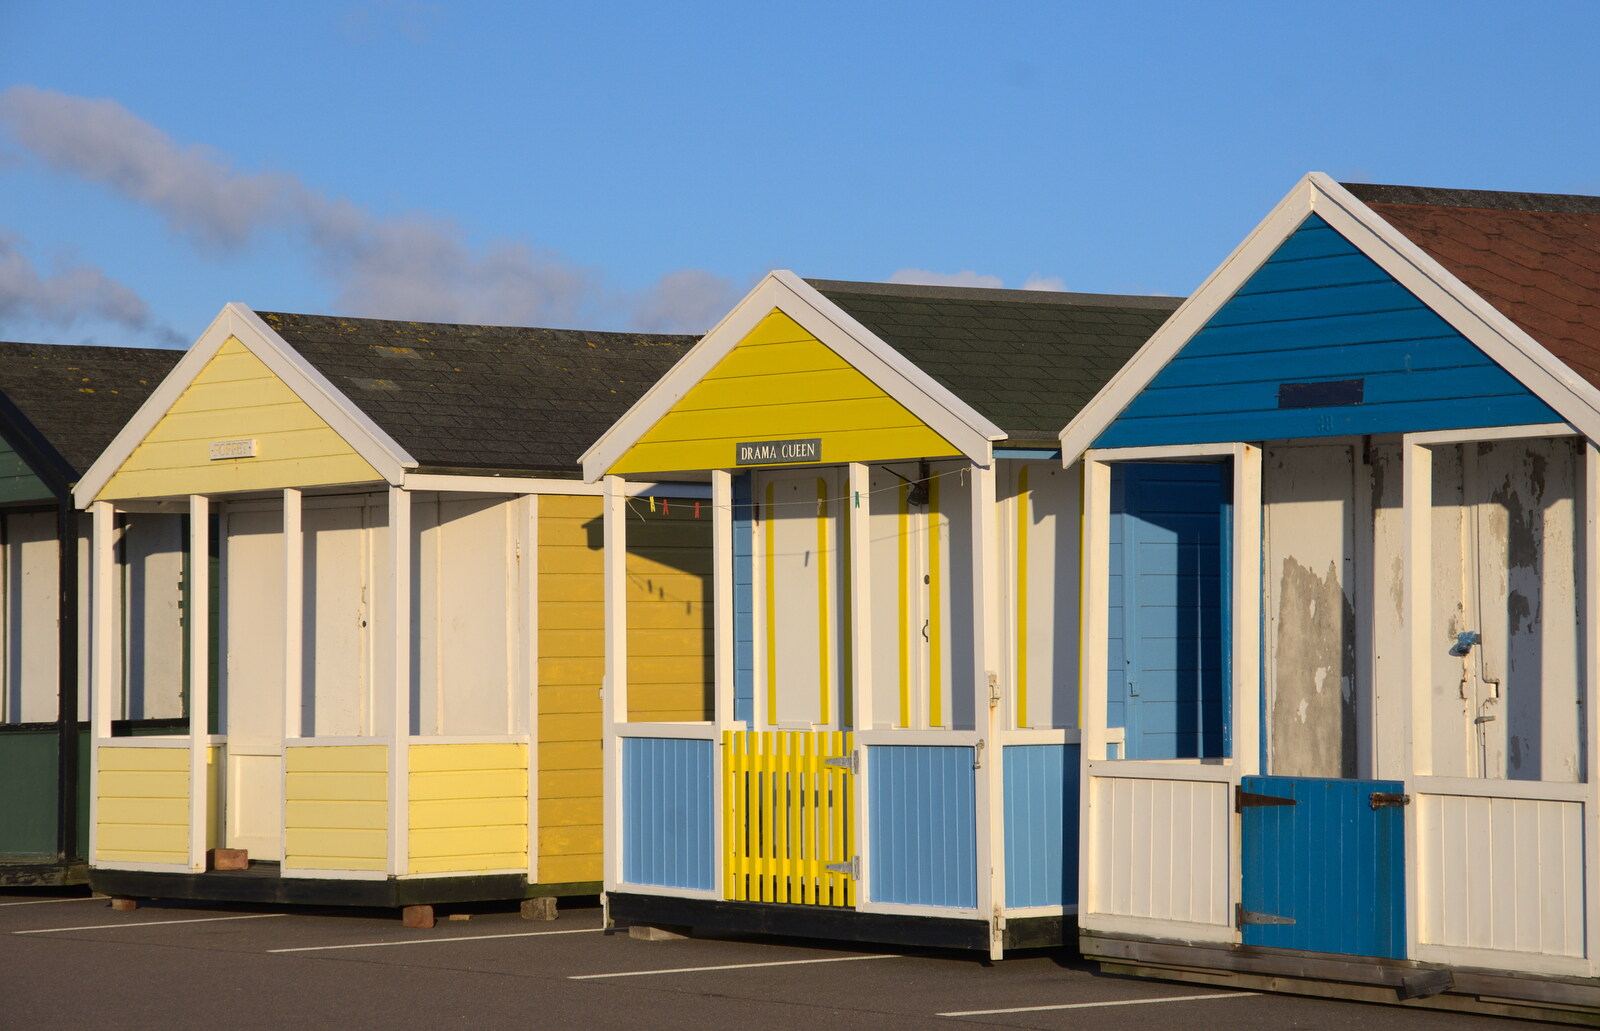 The huts have been moved for the winter from A Trip to the Amusements, Southwold Pier, Southwold, Suffolk - 5th November 2017